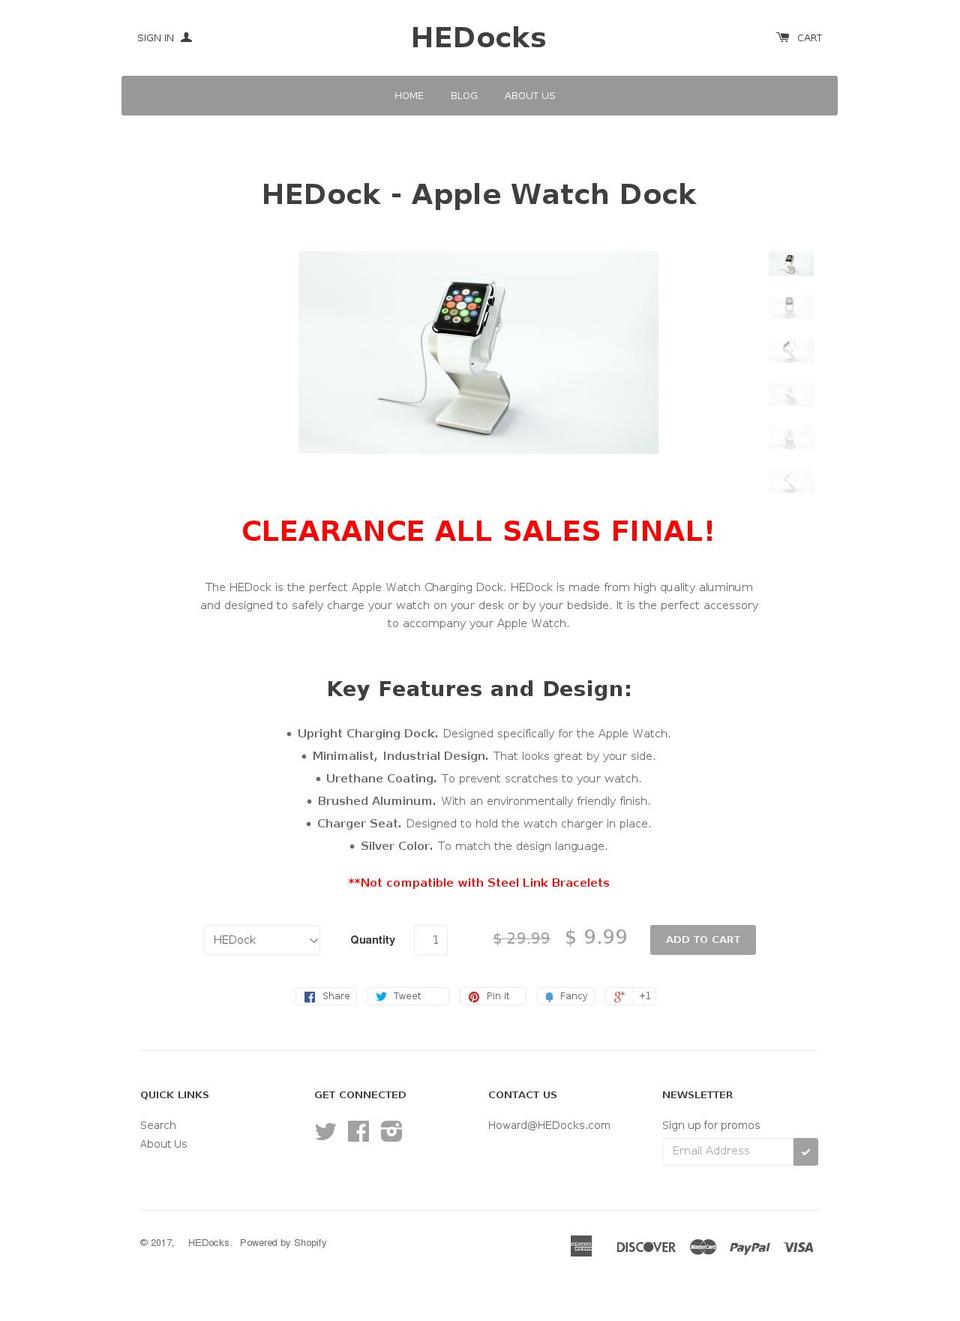 Solo Shopify theme site example hedocks.com